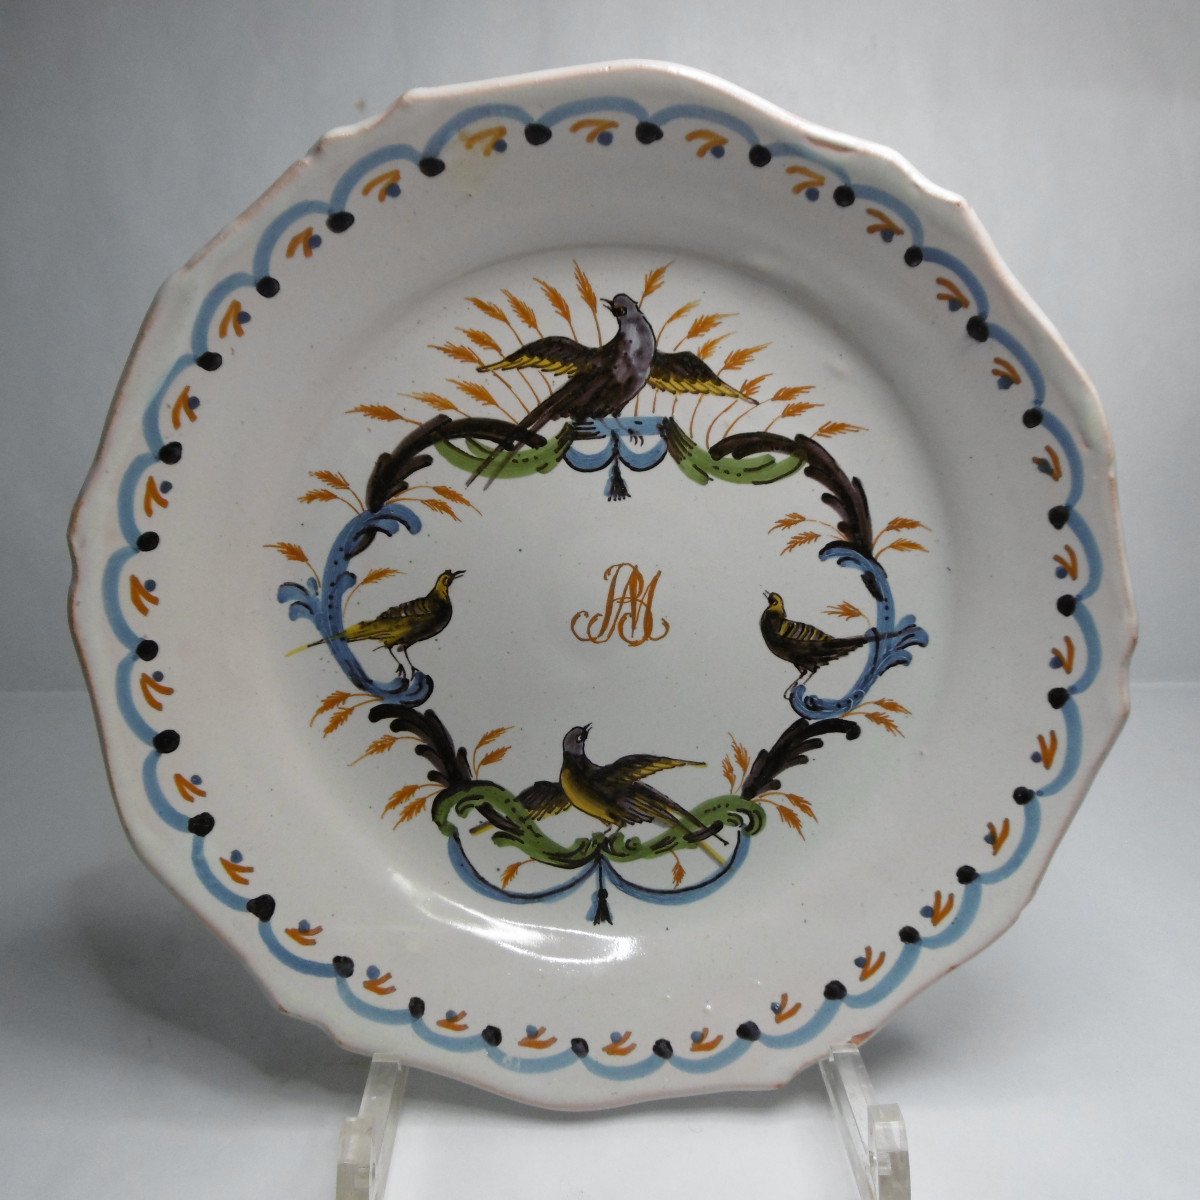 Nevers Earthenware Plate Decorated With Birds And A Monogram D Eighteenth Time